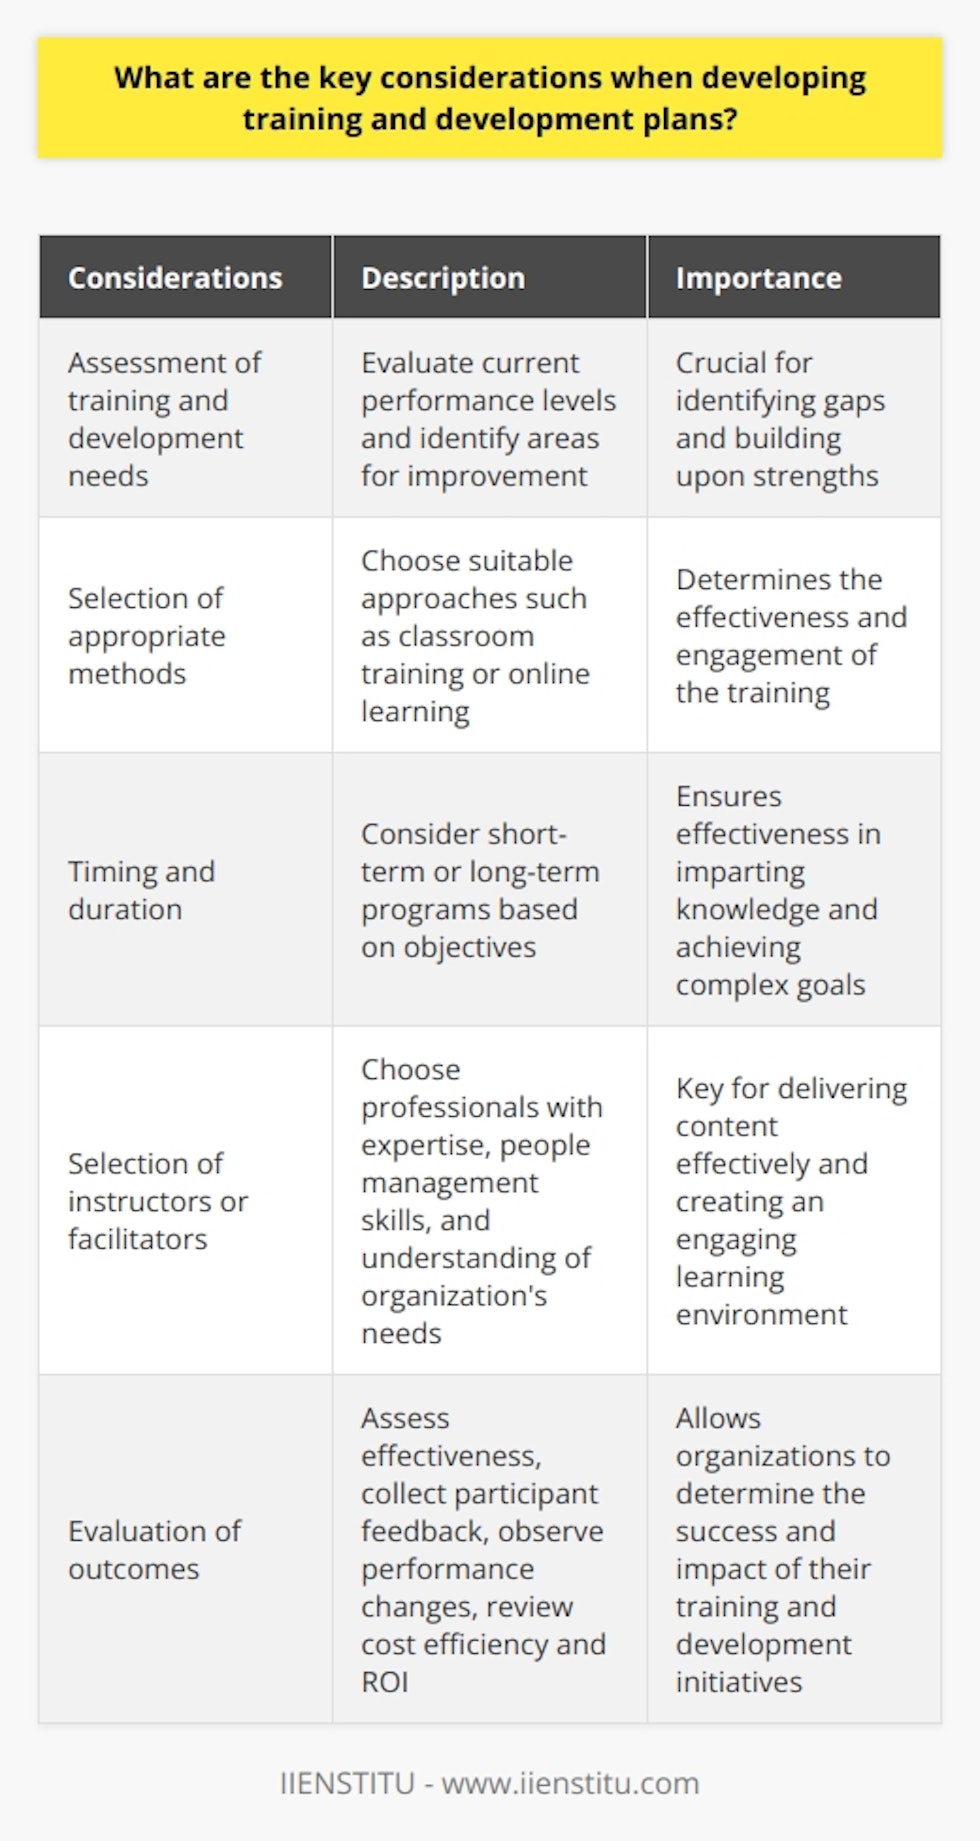 When developing training and development plans, there are several key considerations that should be taken into account to ensure effectiveness and maximize benefits for the organization. Firstly, it is important to assess the existing training and development needs within the organization. This involves evaluating the current performance levels of staff and identifying areas where training and development could enhance individual and team performance. By conducting this assessment, organizations can identify gaps in their current training programs and build upon existing strengths. Once the training and development needs have been identified, appropriate methods should be selected to address these needs. This can include a variety of approaches such as traditional classroom-based training, online learning, on-the-job training, or role-playing activities. The selection of the most suitable method depends on factors such as the nature of the skills being developed, the learning preferences of the participants, and the available resources. It is also crucial to carefully consider the timing and duration of the training and development plan. Short-term and intensive activities are often effective for imparting specific knowledge or skills, while longer-term programs are preferred for building competence and achieving more complex objectives. Organizations should also consider the resources required to execute and manage the plan, ensuring that sufficient time and resources are allocated to support the training and development efforts. Another important consideration is the selection of instructors or facilitators. It is essential to choose professionals with expertise in the subject matter, strong people management skills, and a good understanding of the organization's needs. The instructors should be able to effectively deliver the training content, create an engaging learning environment, and provide guidance and support to the participants. Finally, the outcomes of the training and development plan should be regularly evaluated. This includes assessing the effectiveness of the delivery methods, monitoring participant feedback, and observing tangible changes in staff performance. Organizations should also review the cost efficiency and Return On Investment of the plan to ensure that the desired outcomes are being achieved. In conclusion, developing effective training and development plans requires a careful consideration of existing needs, selection of appropriate methods, evaluation of timing and duration, selection of skilled instructors, and regular evaluation of outcomes. By giving thoughtful attention to these key considerations, organizations can enhance the success and impact of their training and development initiatives.